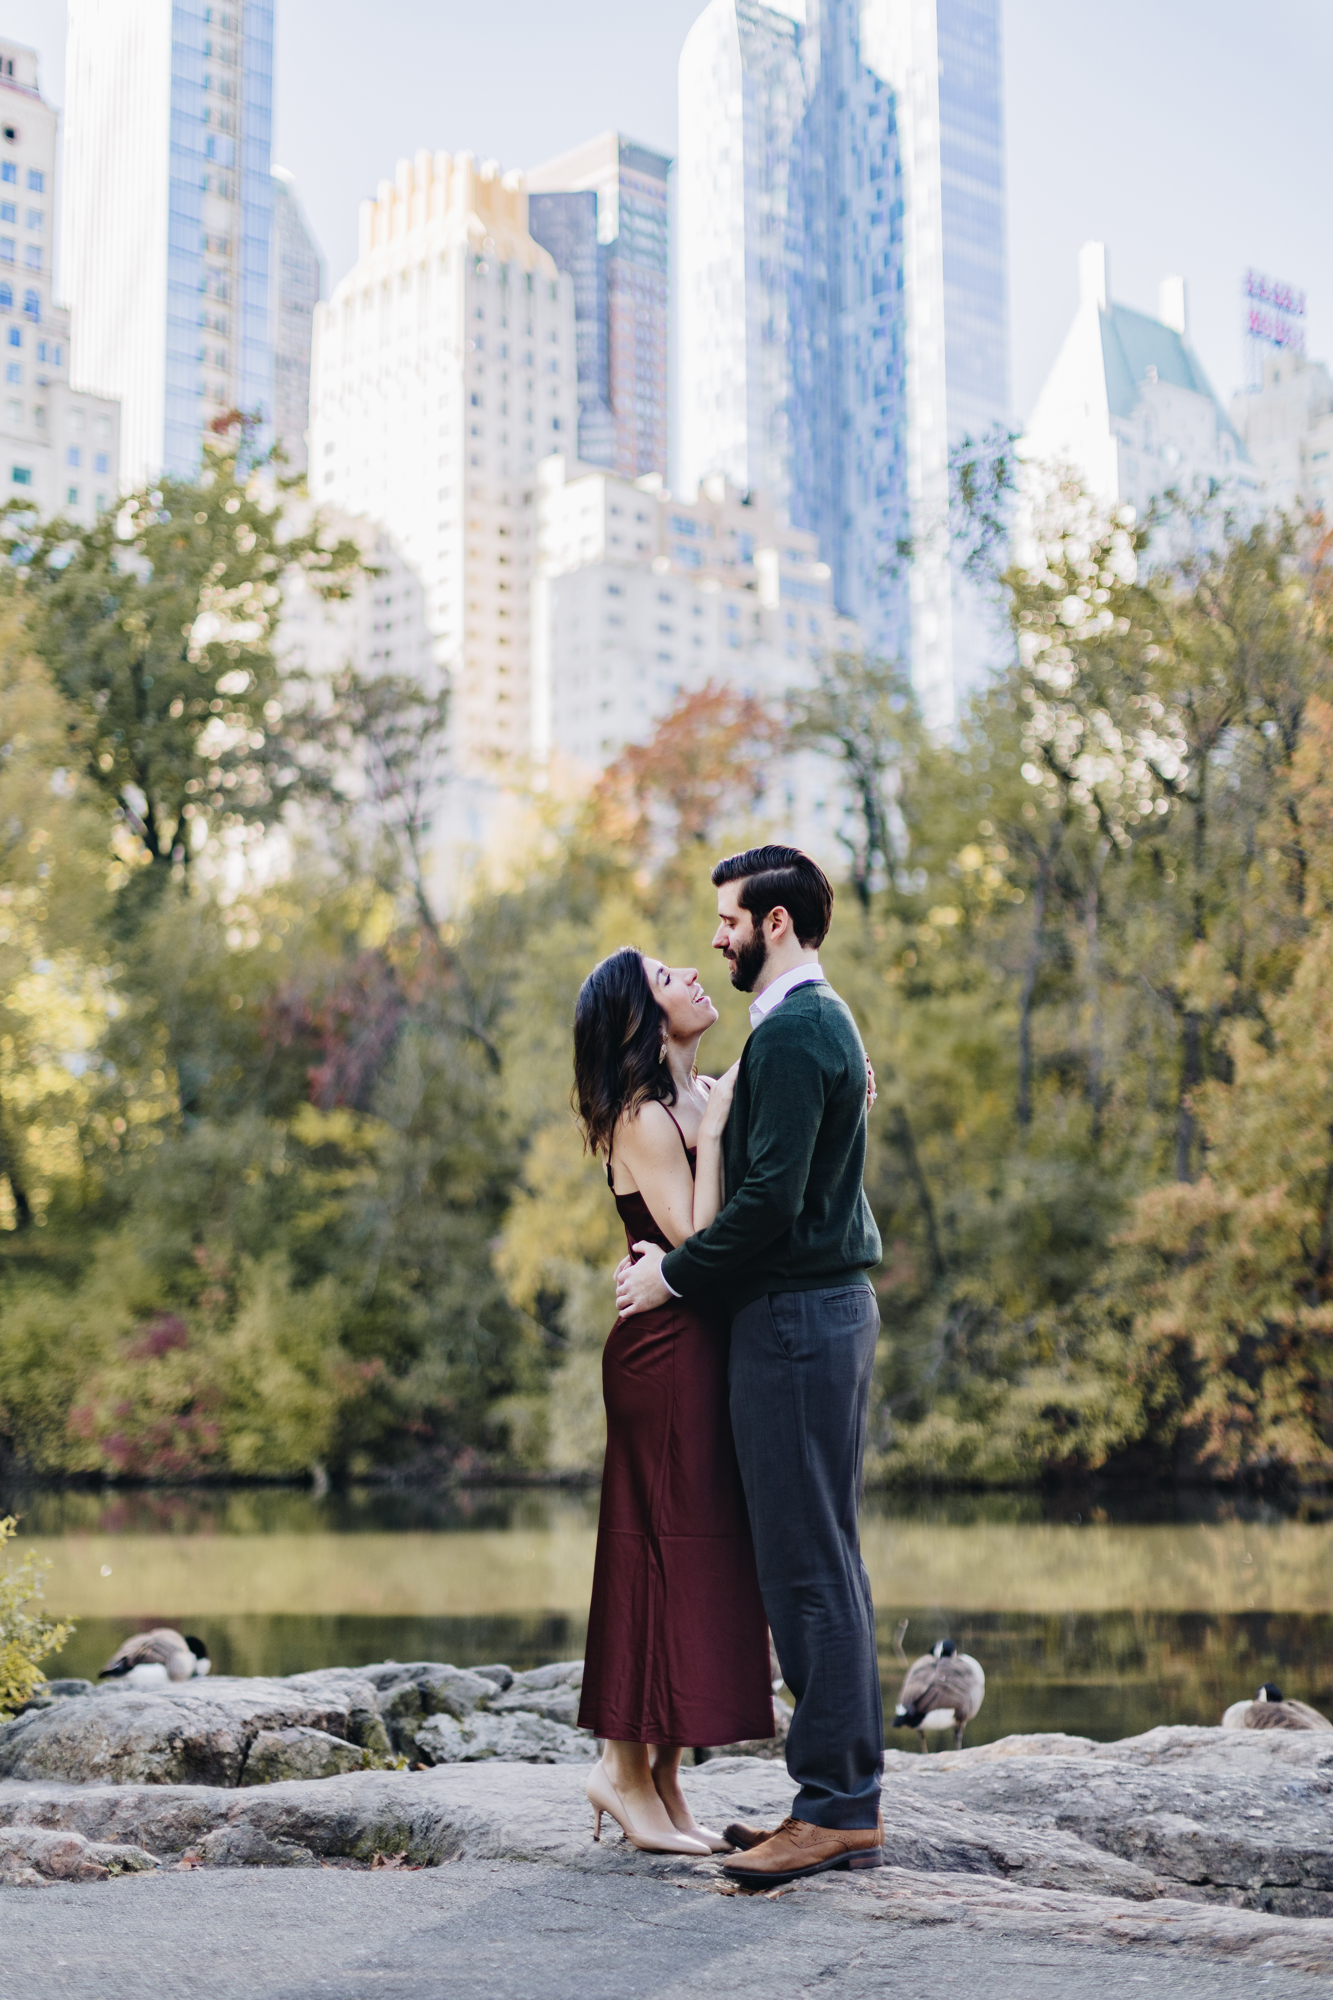 Vivid Central Park Engagement Photos in Fall